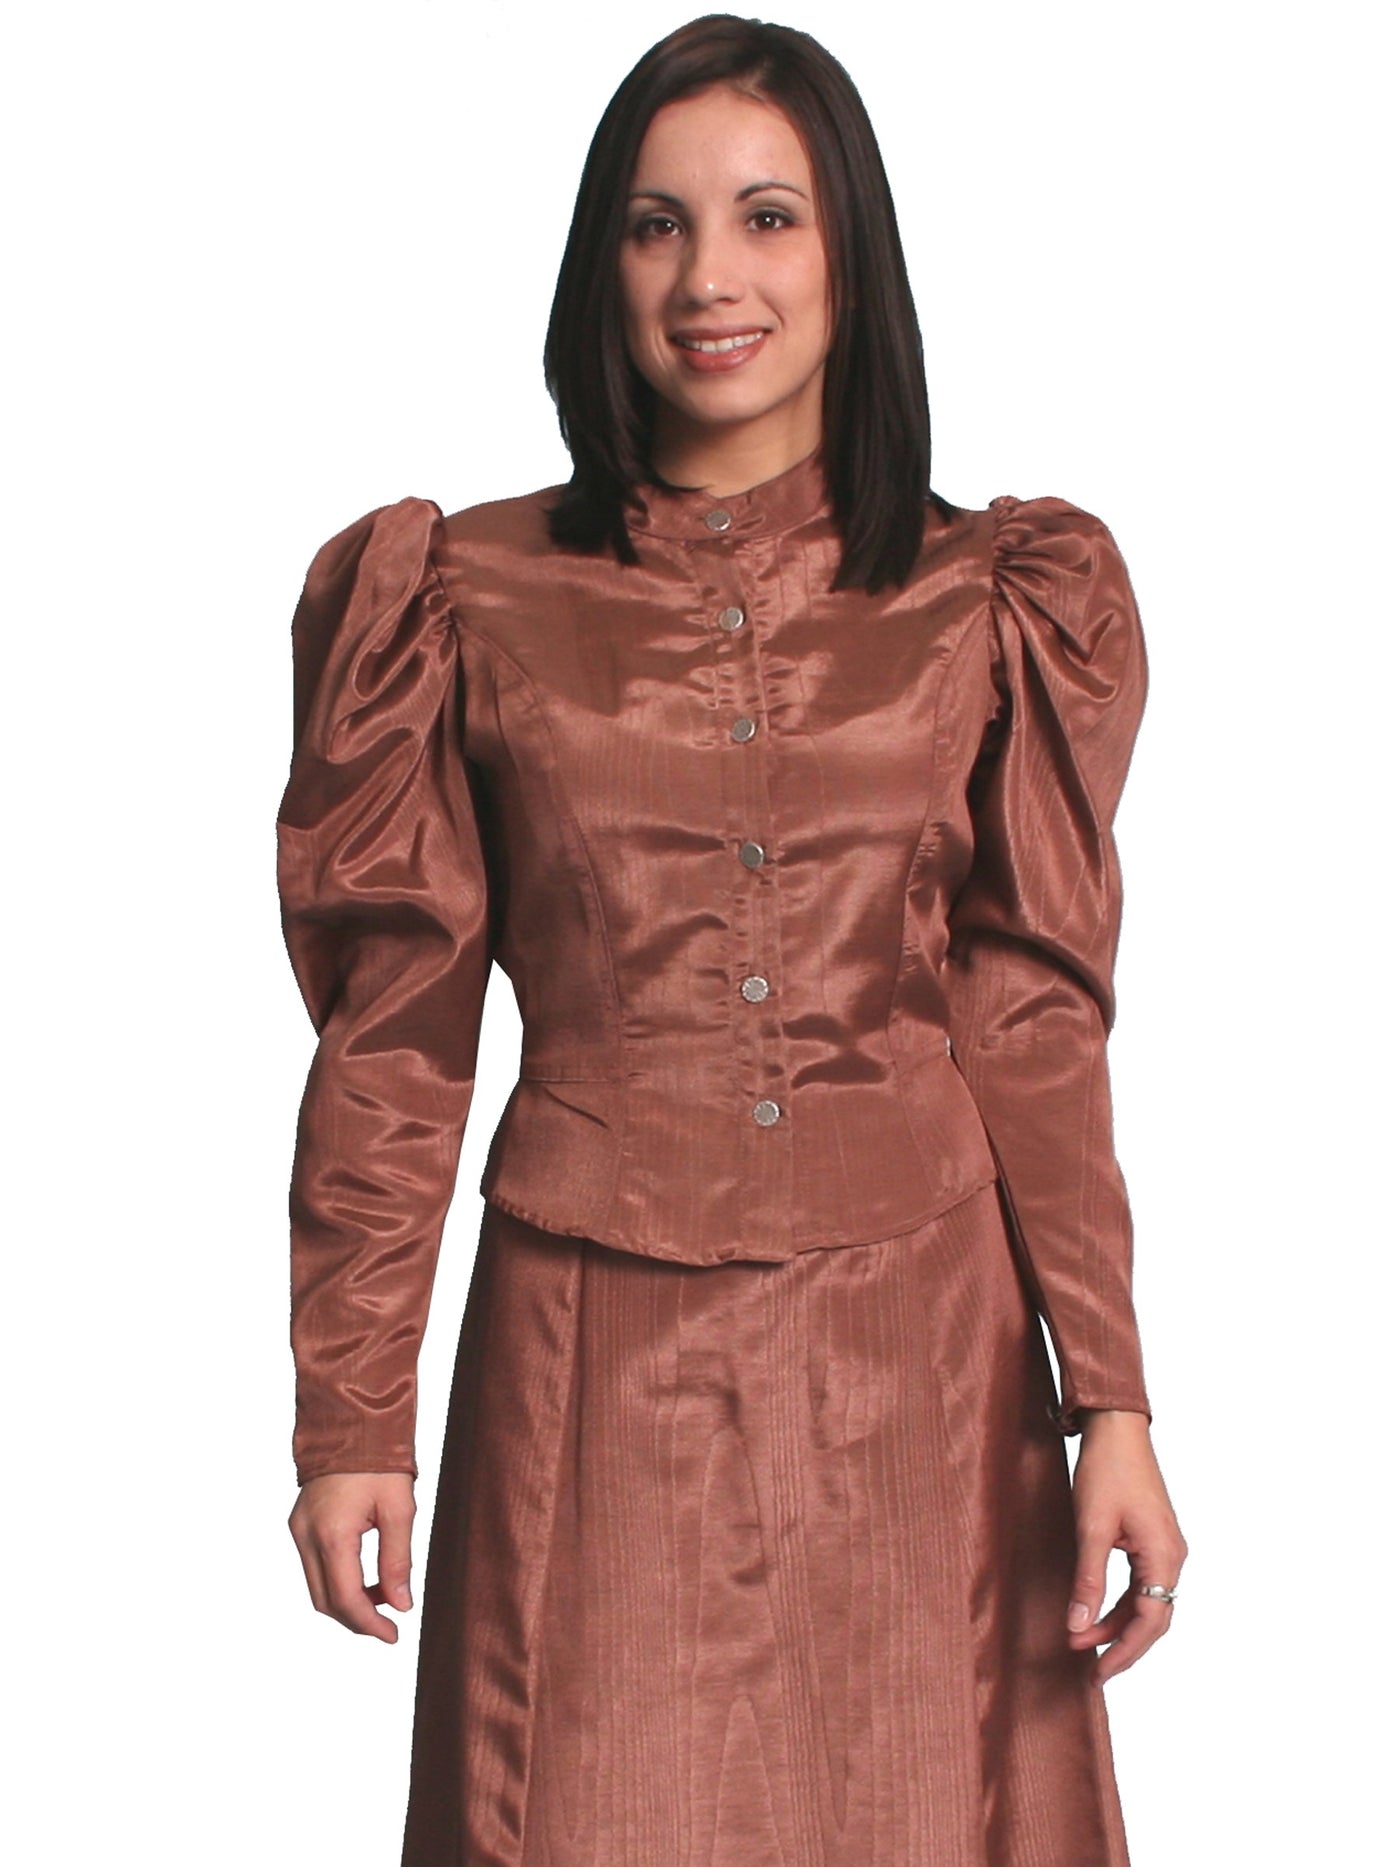 Victorian Style Puff Sleeves Blouse in Chocolate - SOLD OUT